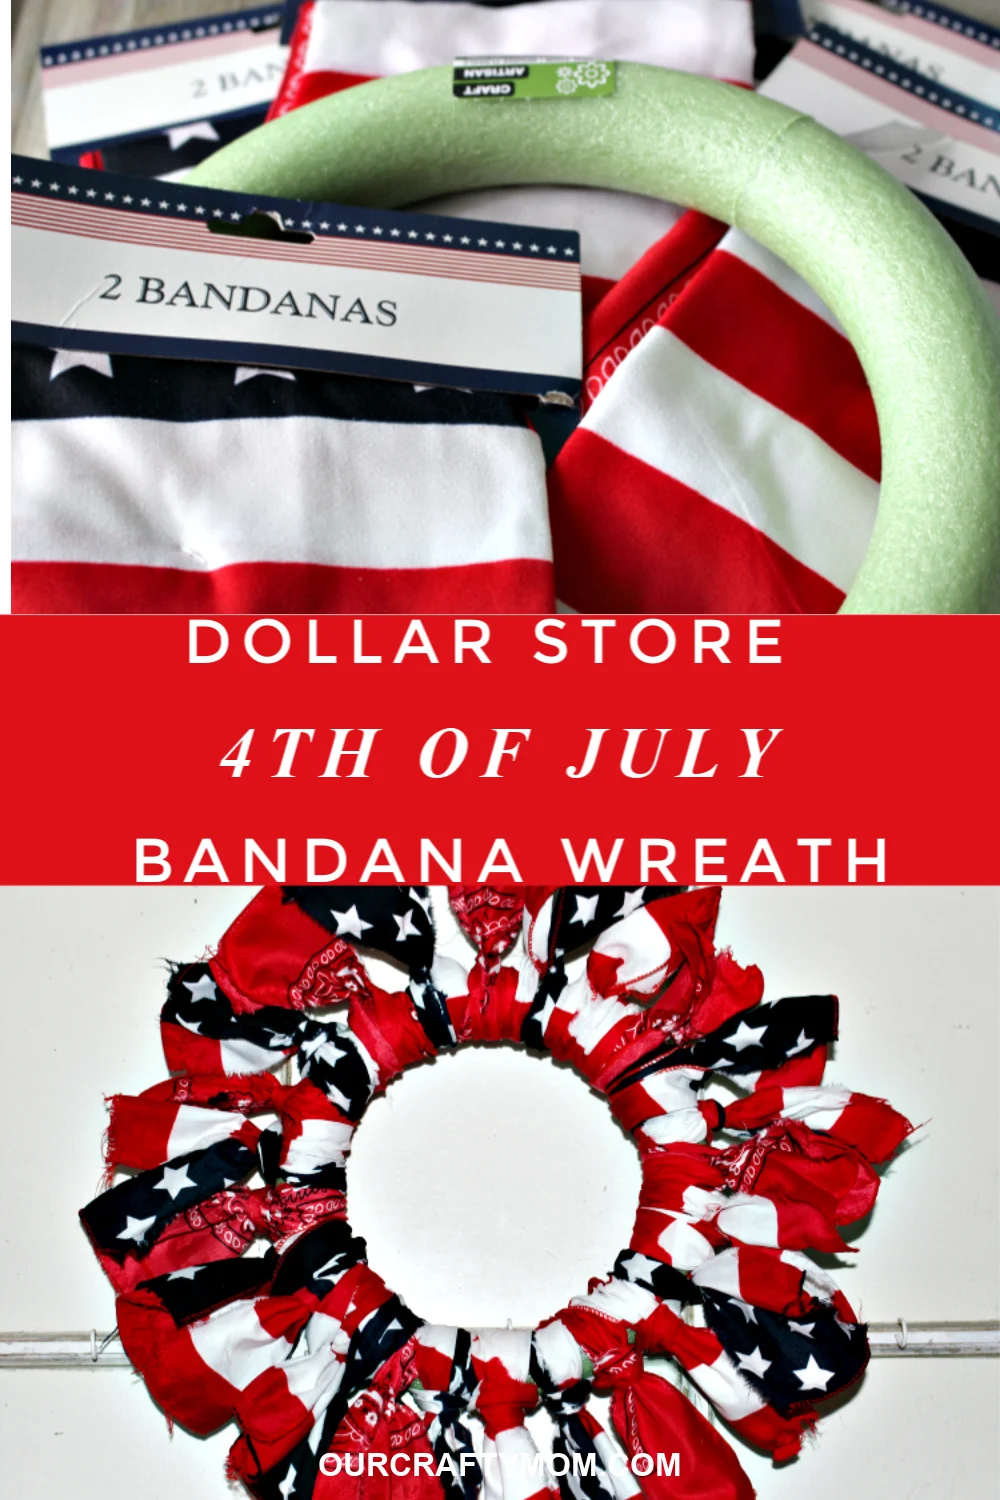 4th of july wreath with bandanas from the dollar store